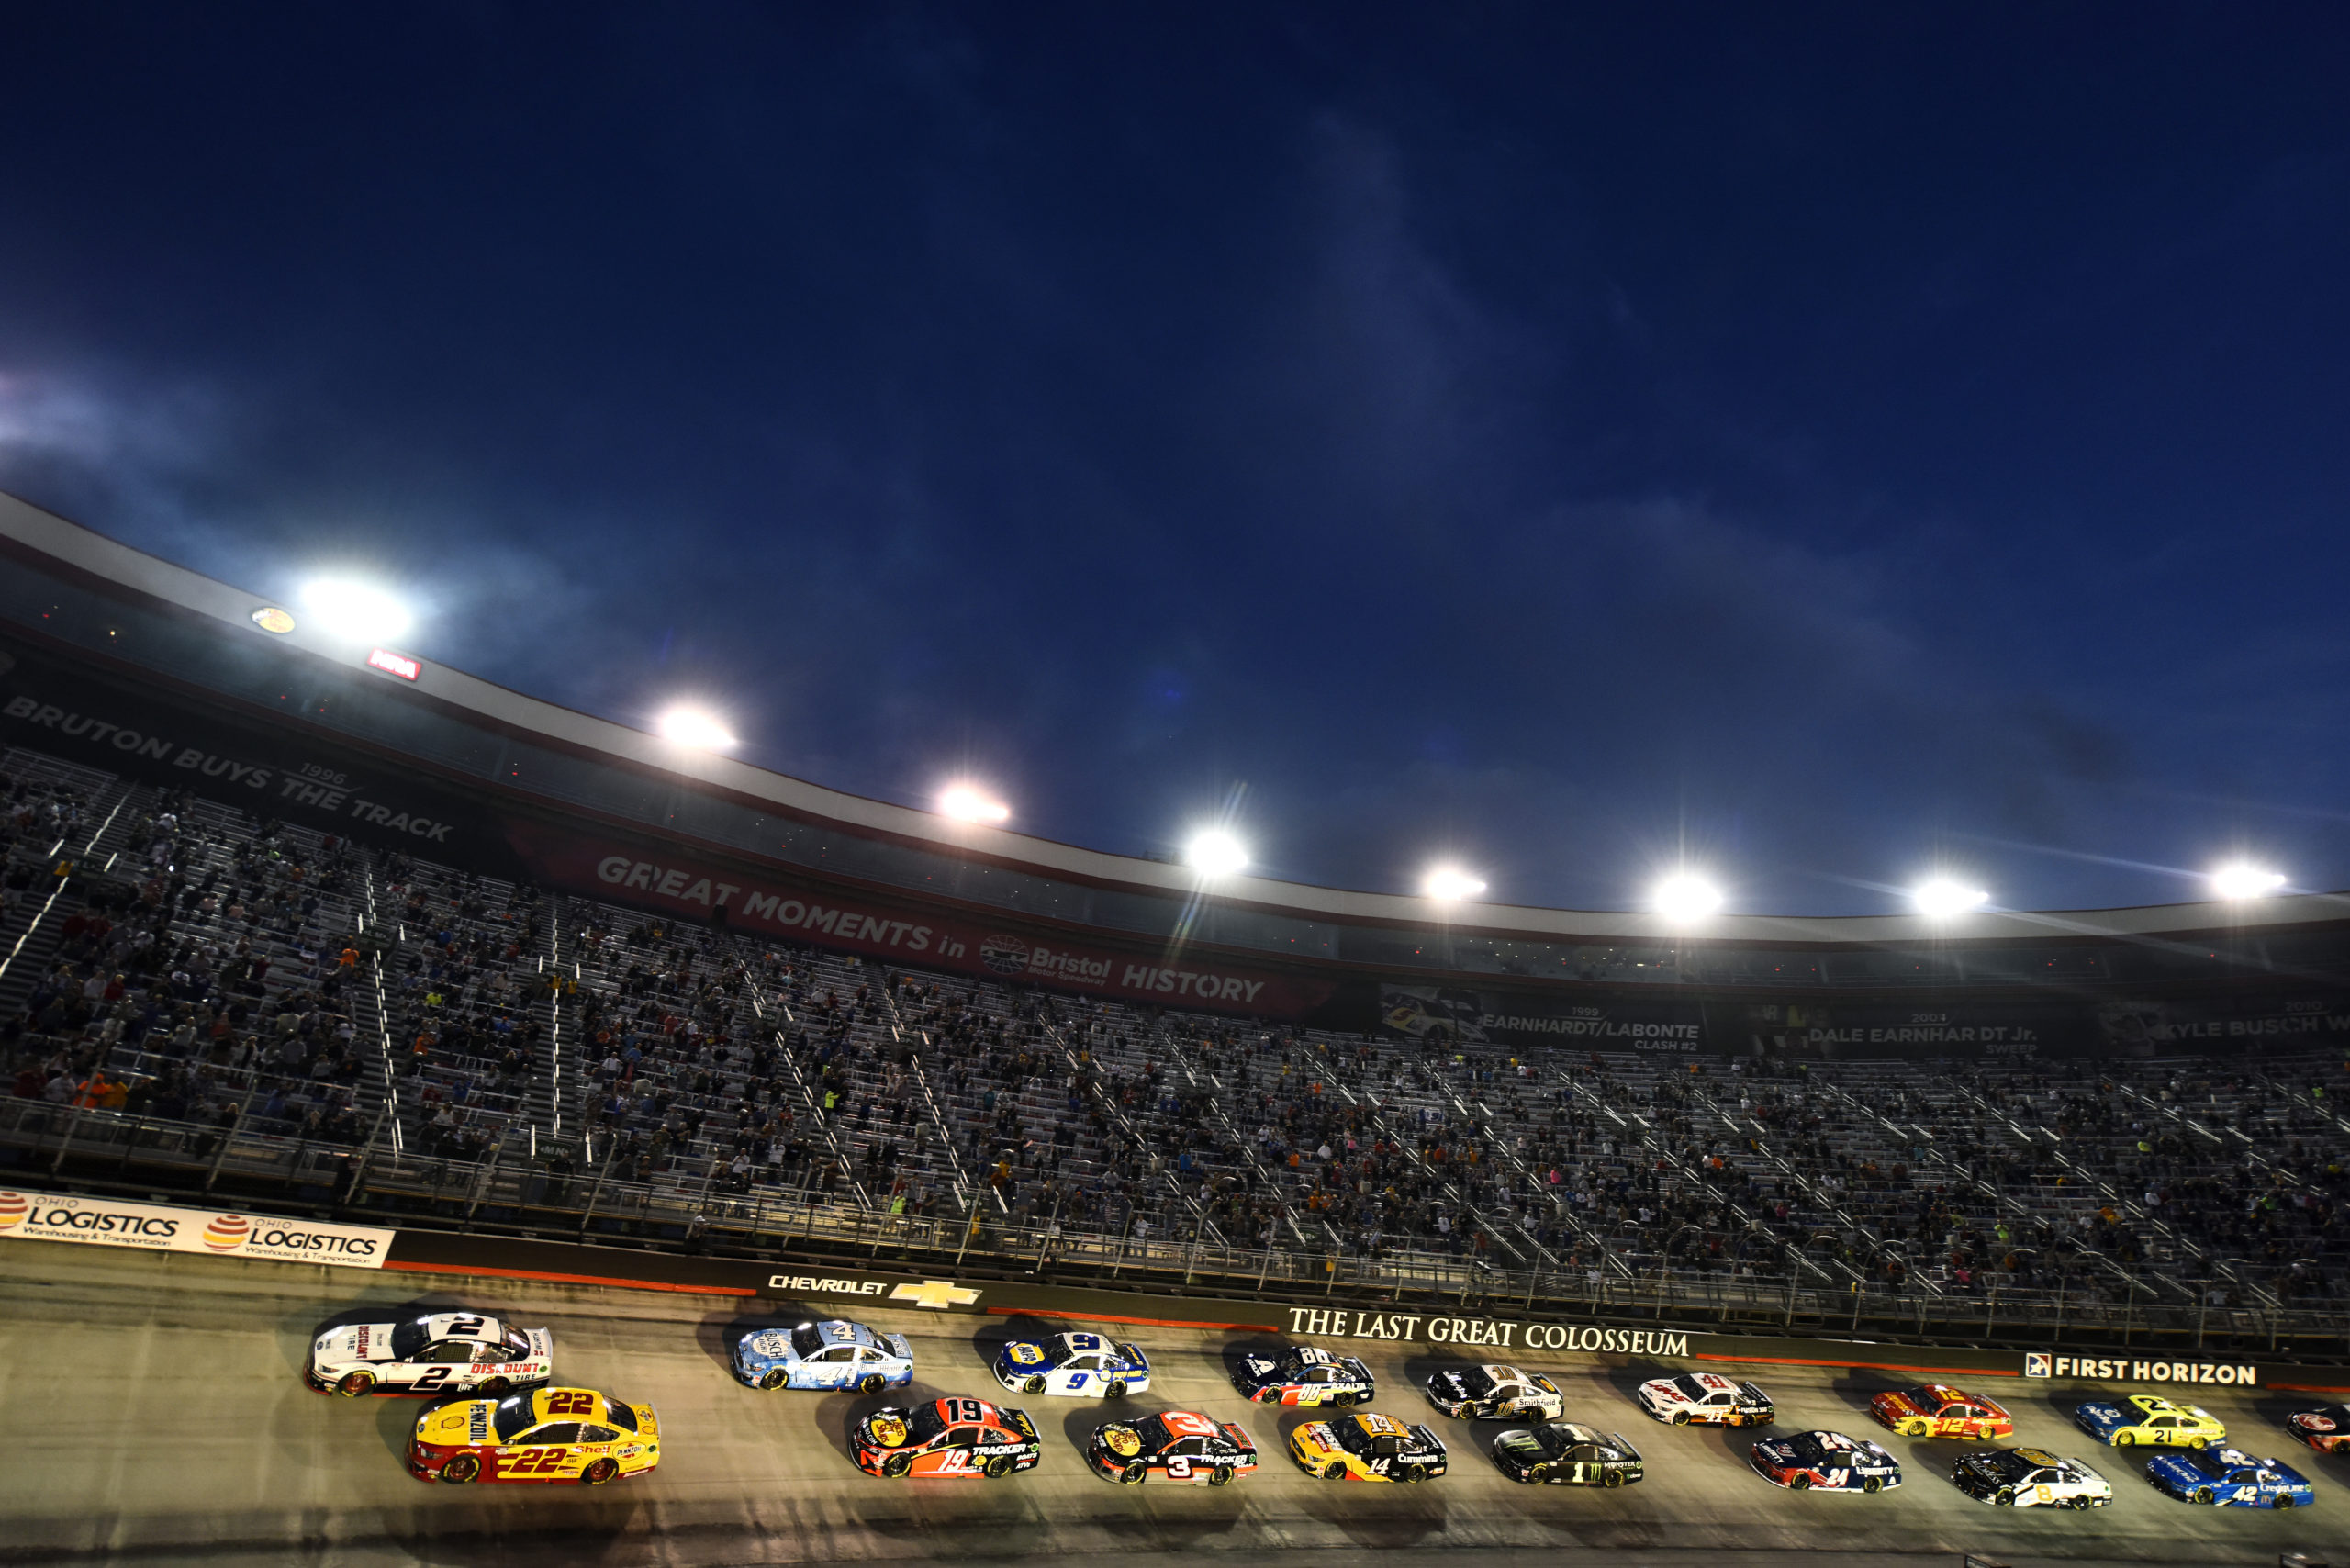 Who Can Conquer the Last Great Coliseum at Bristol?